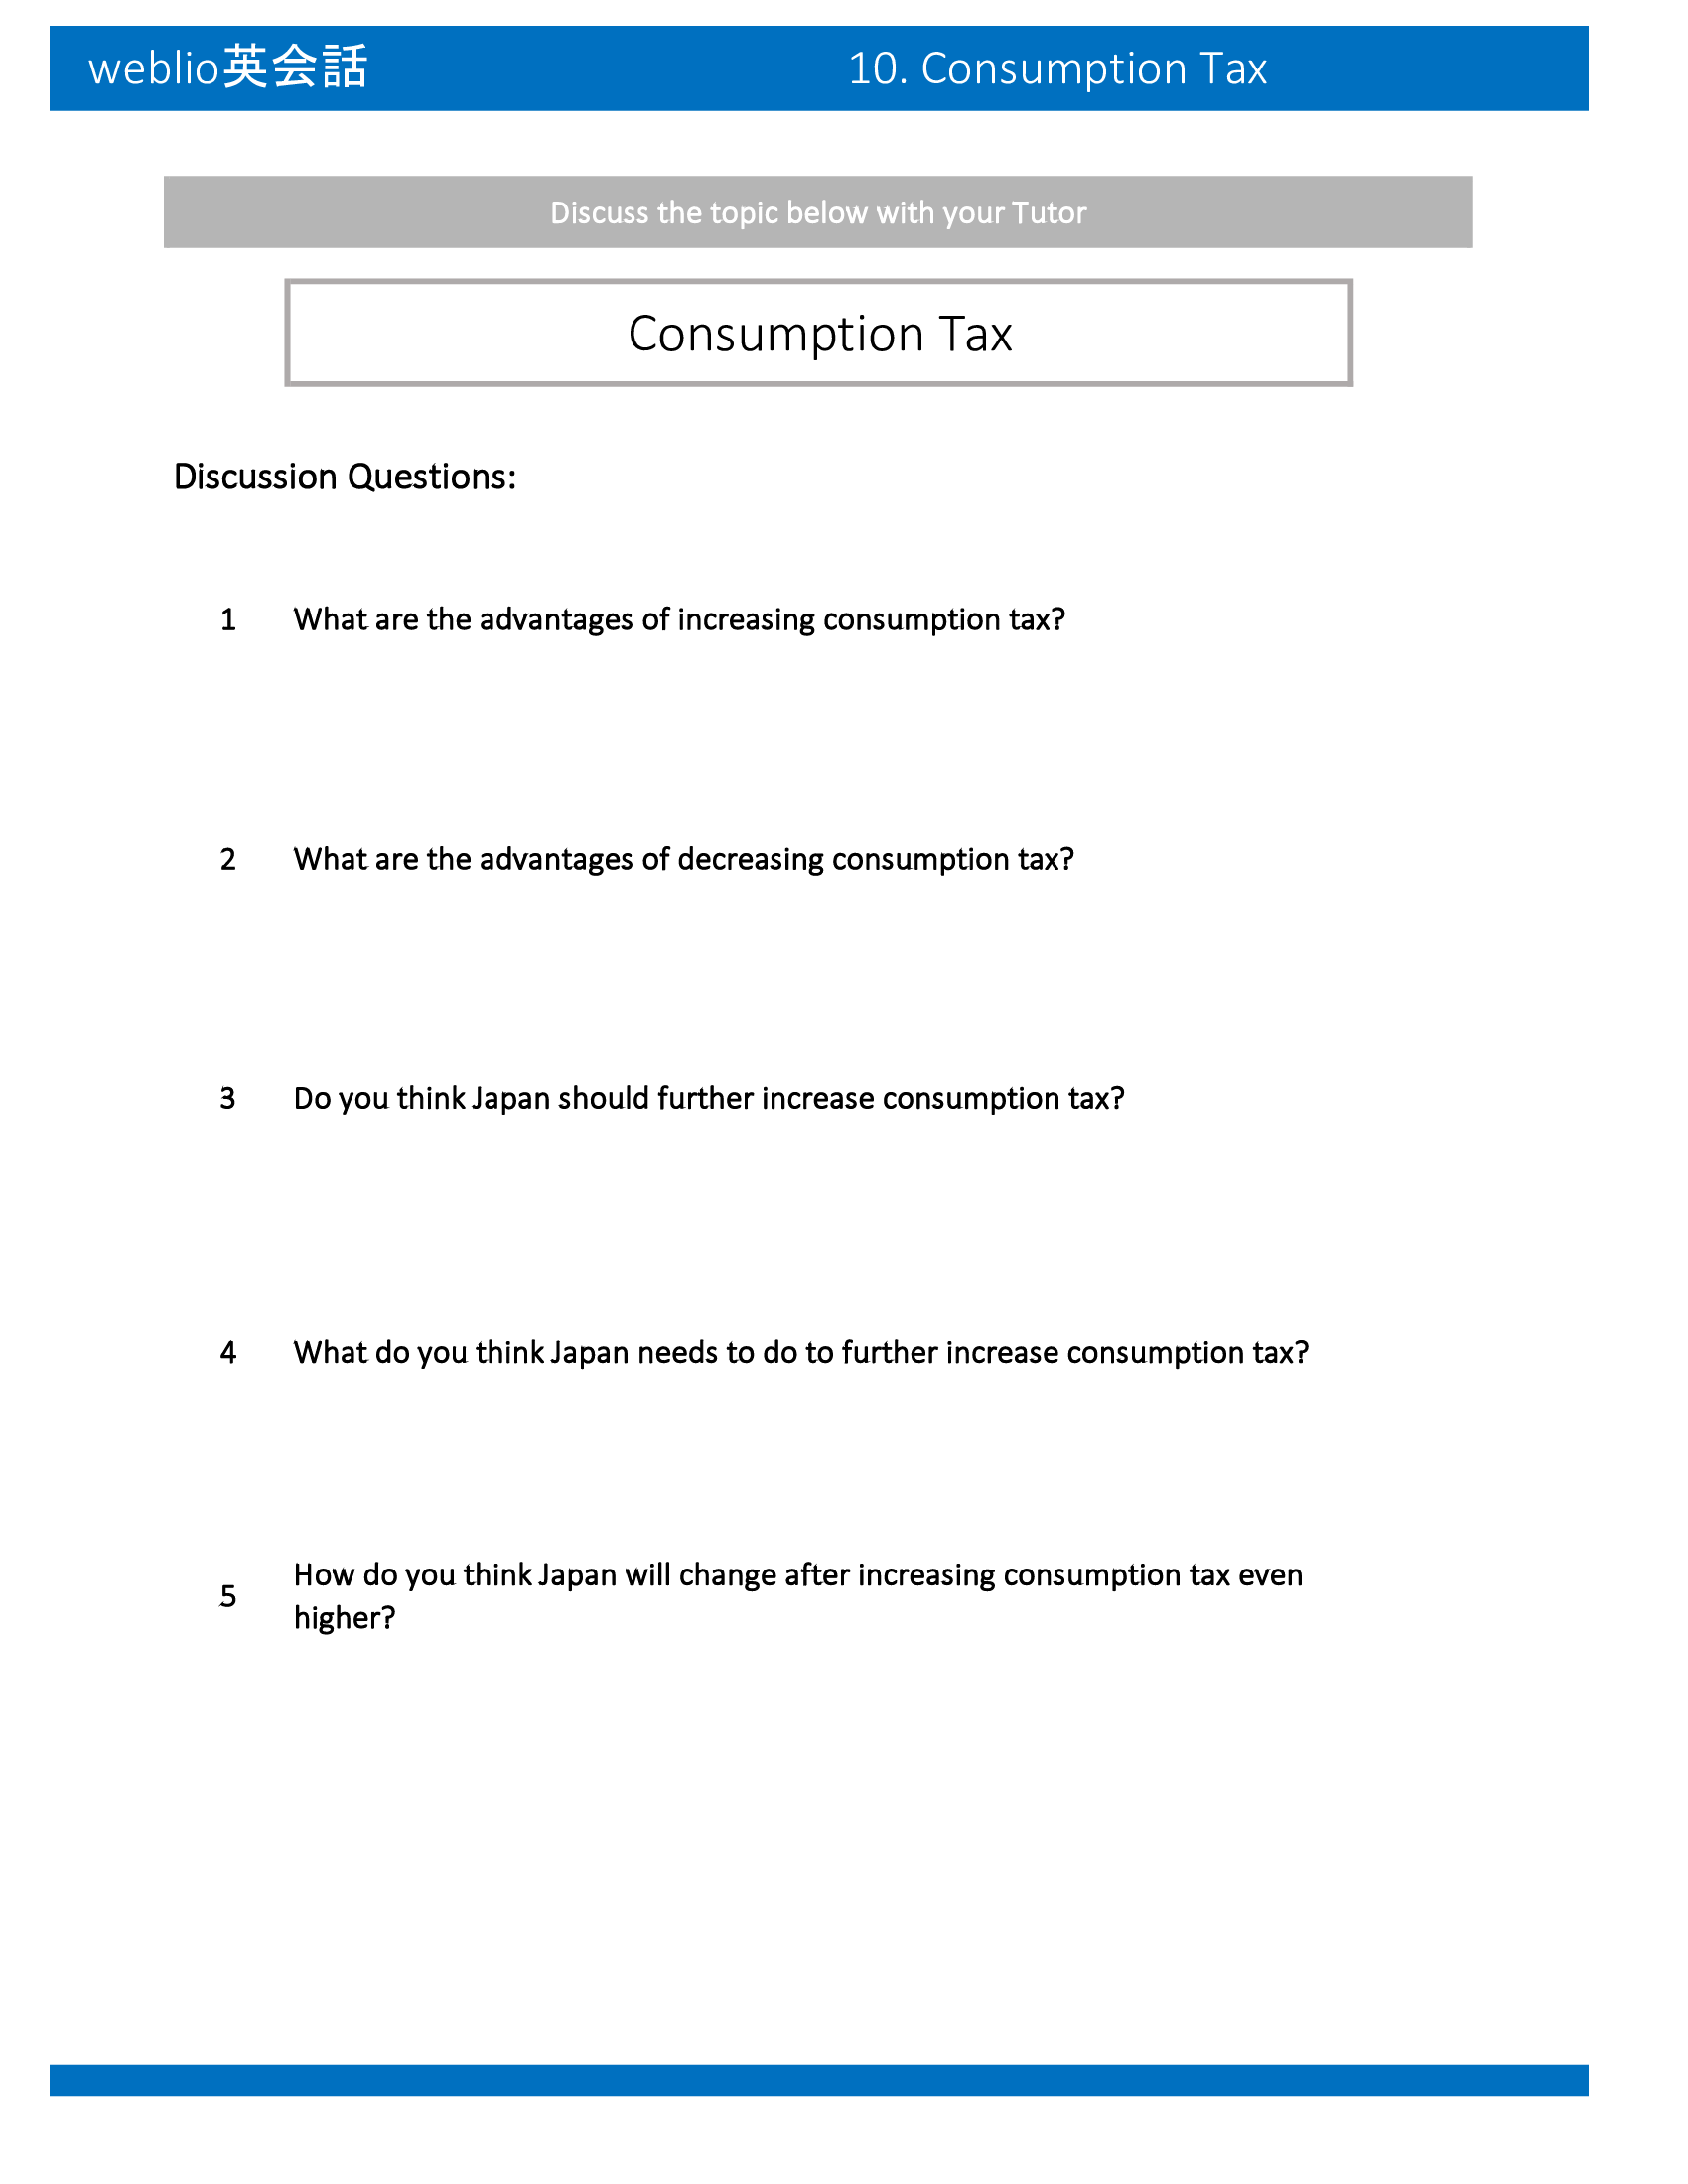 topic-discussion-consumption-tax